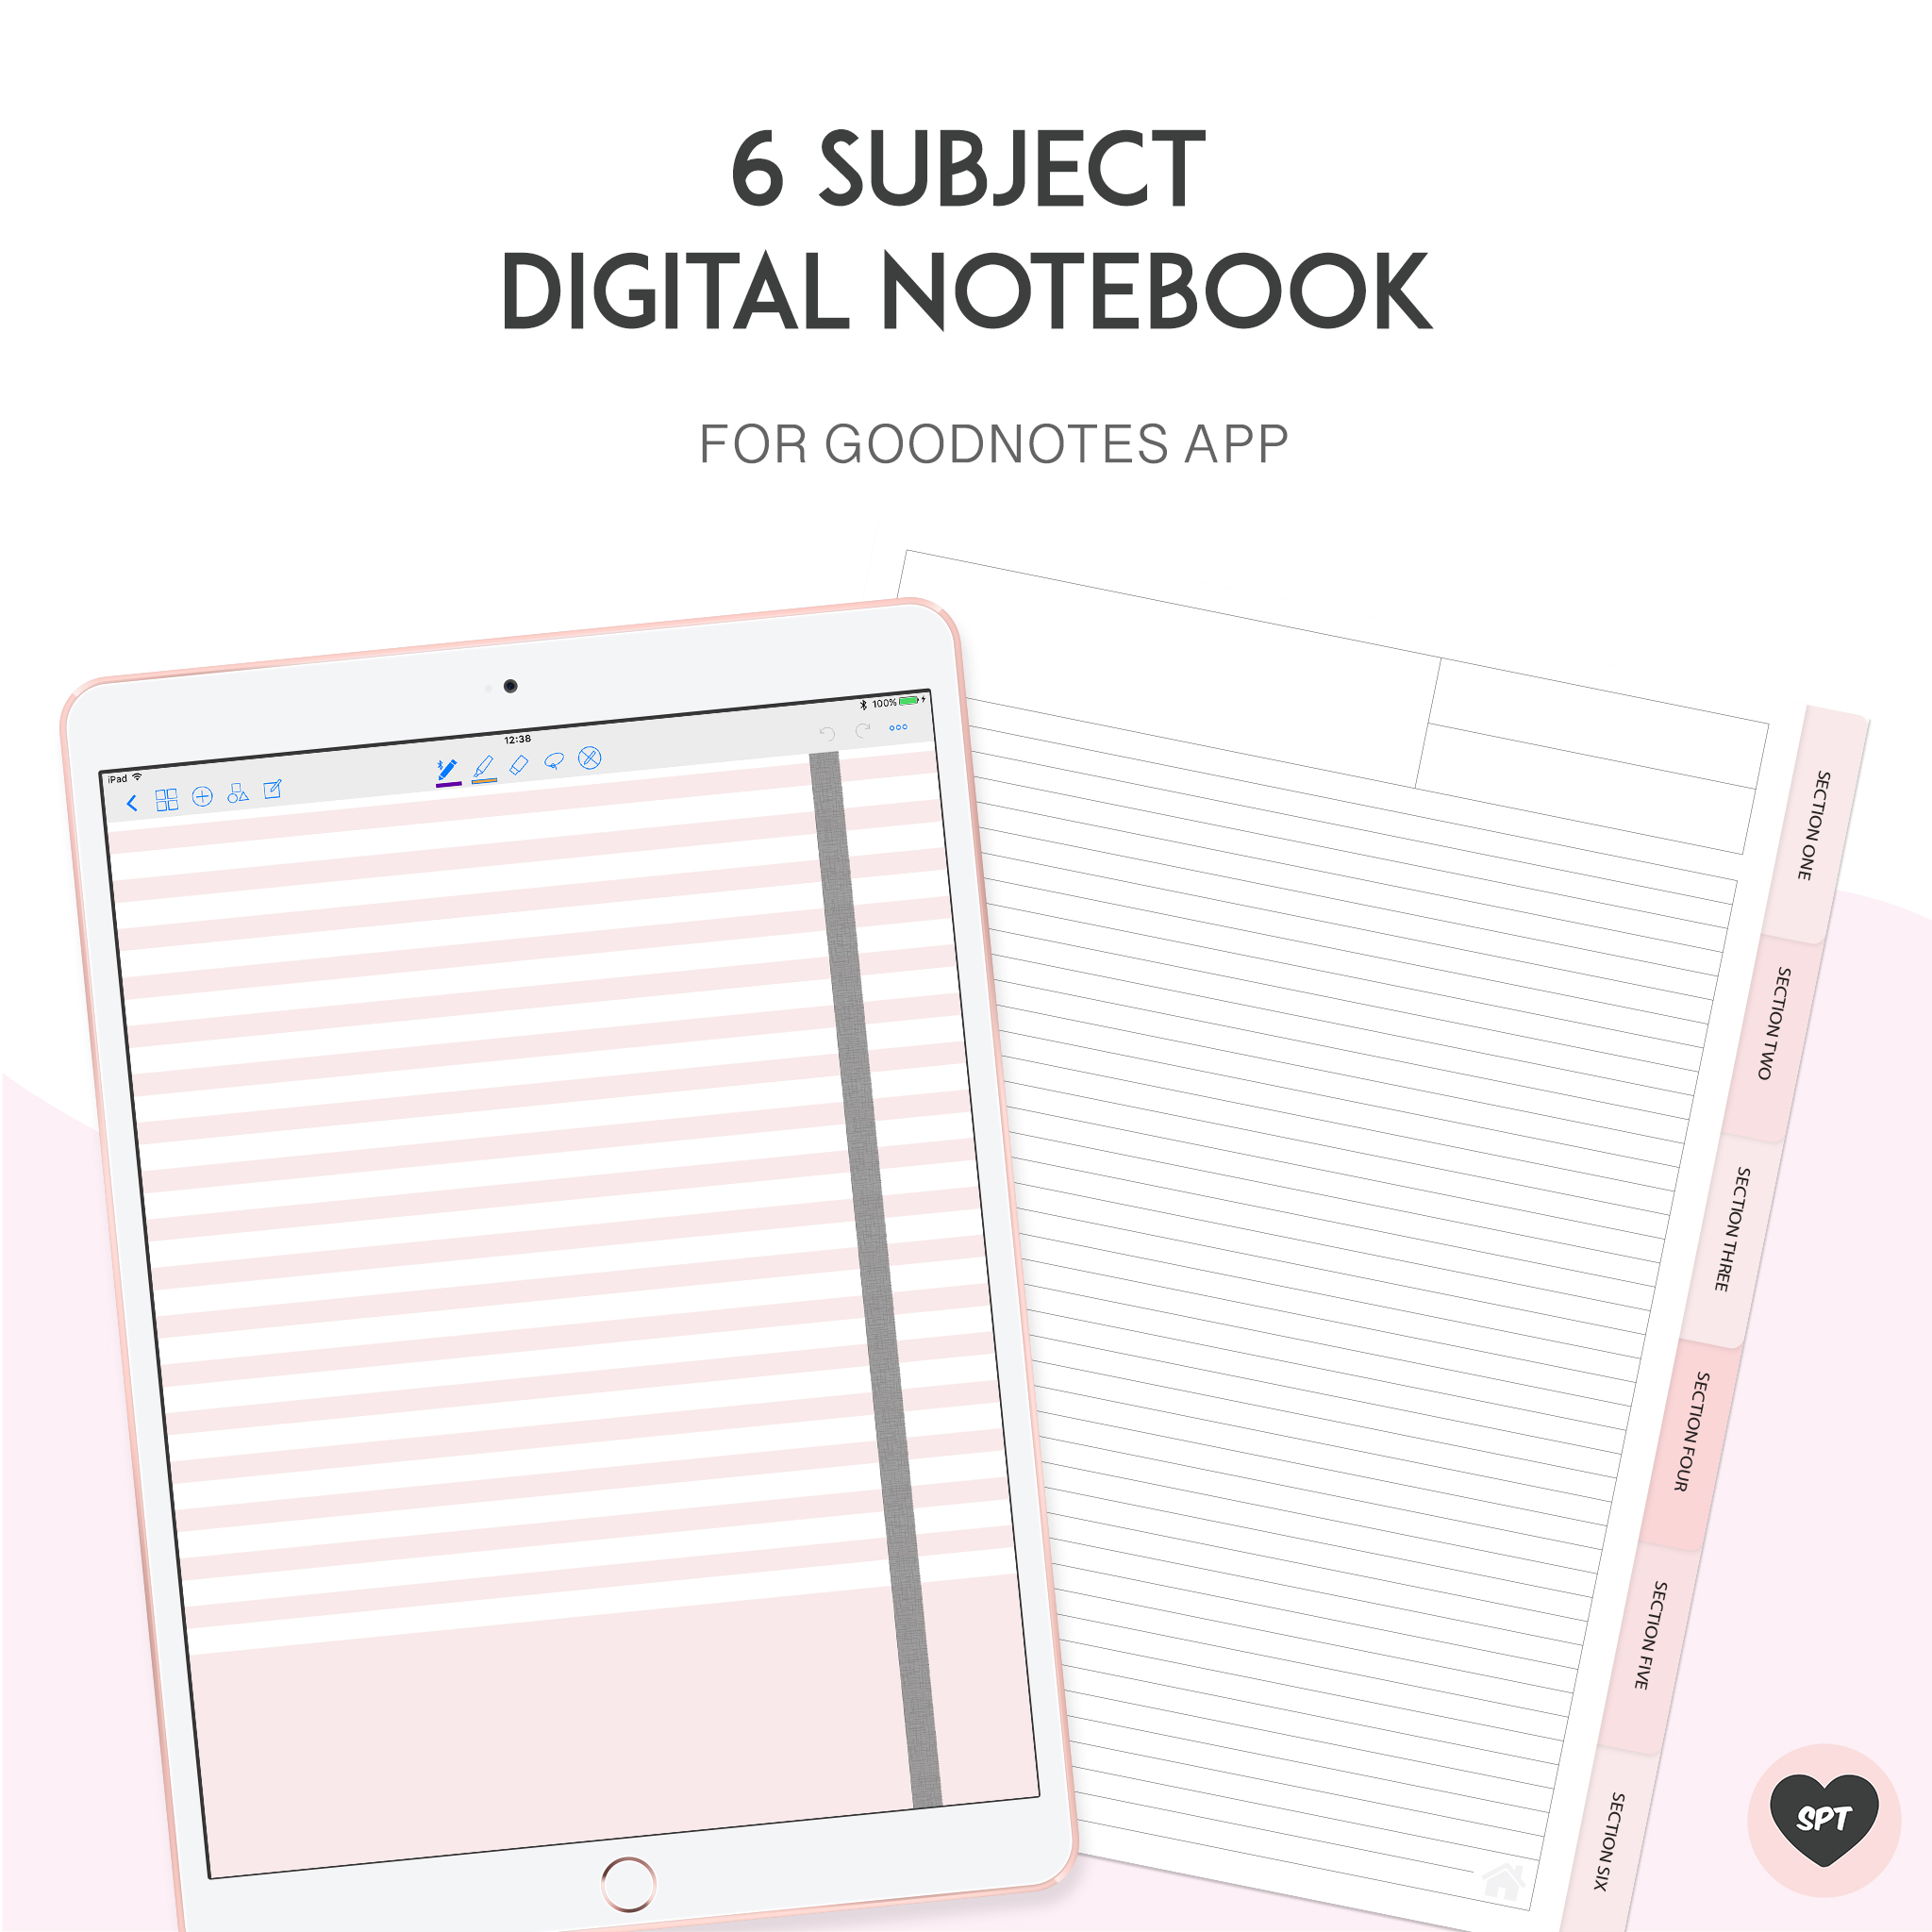 Digital Notebook for goodnotes